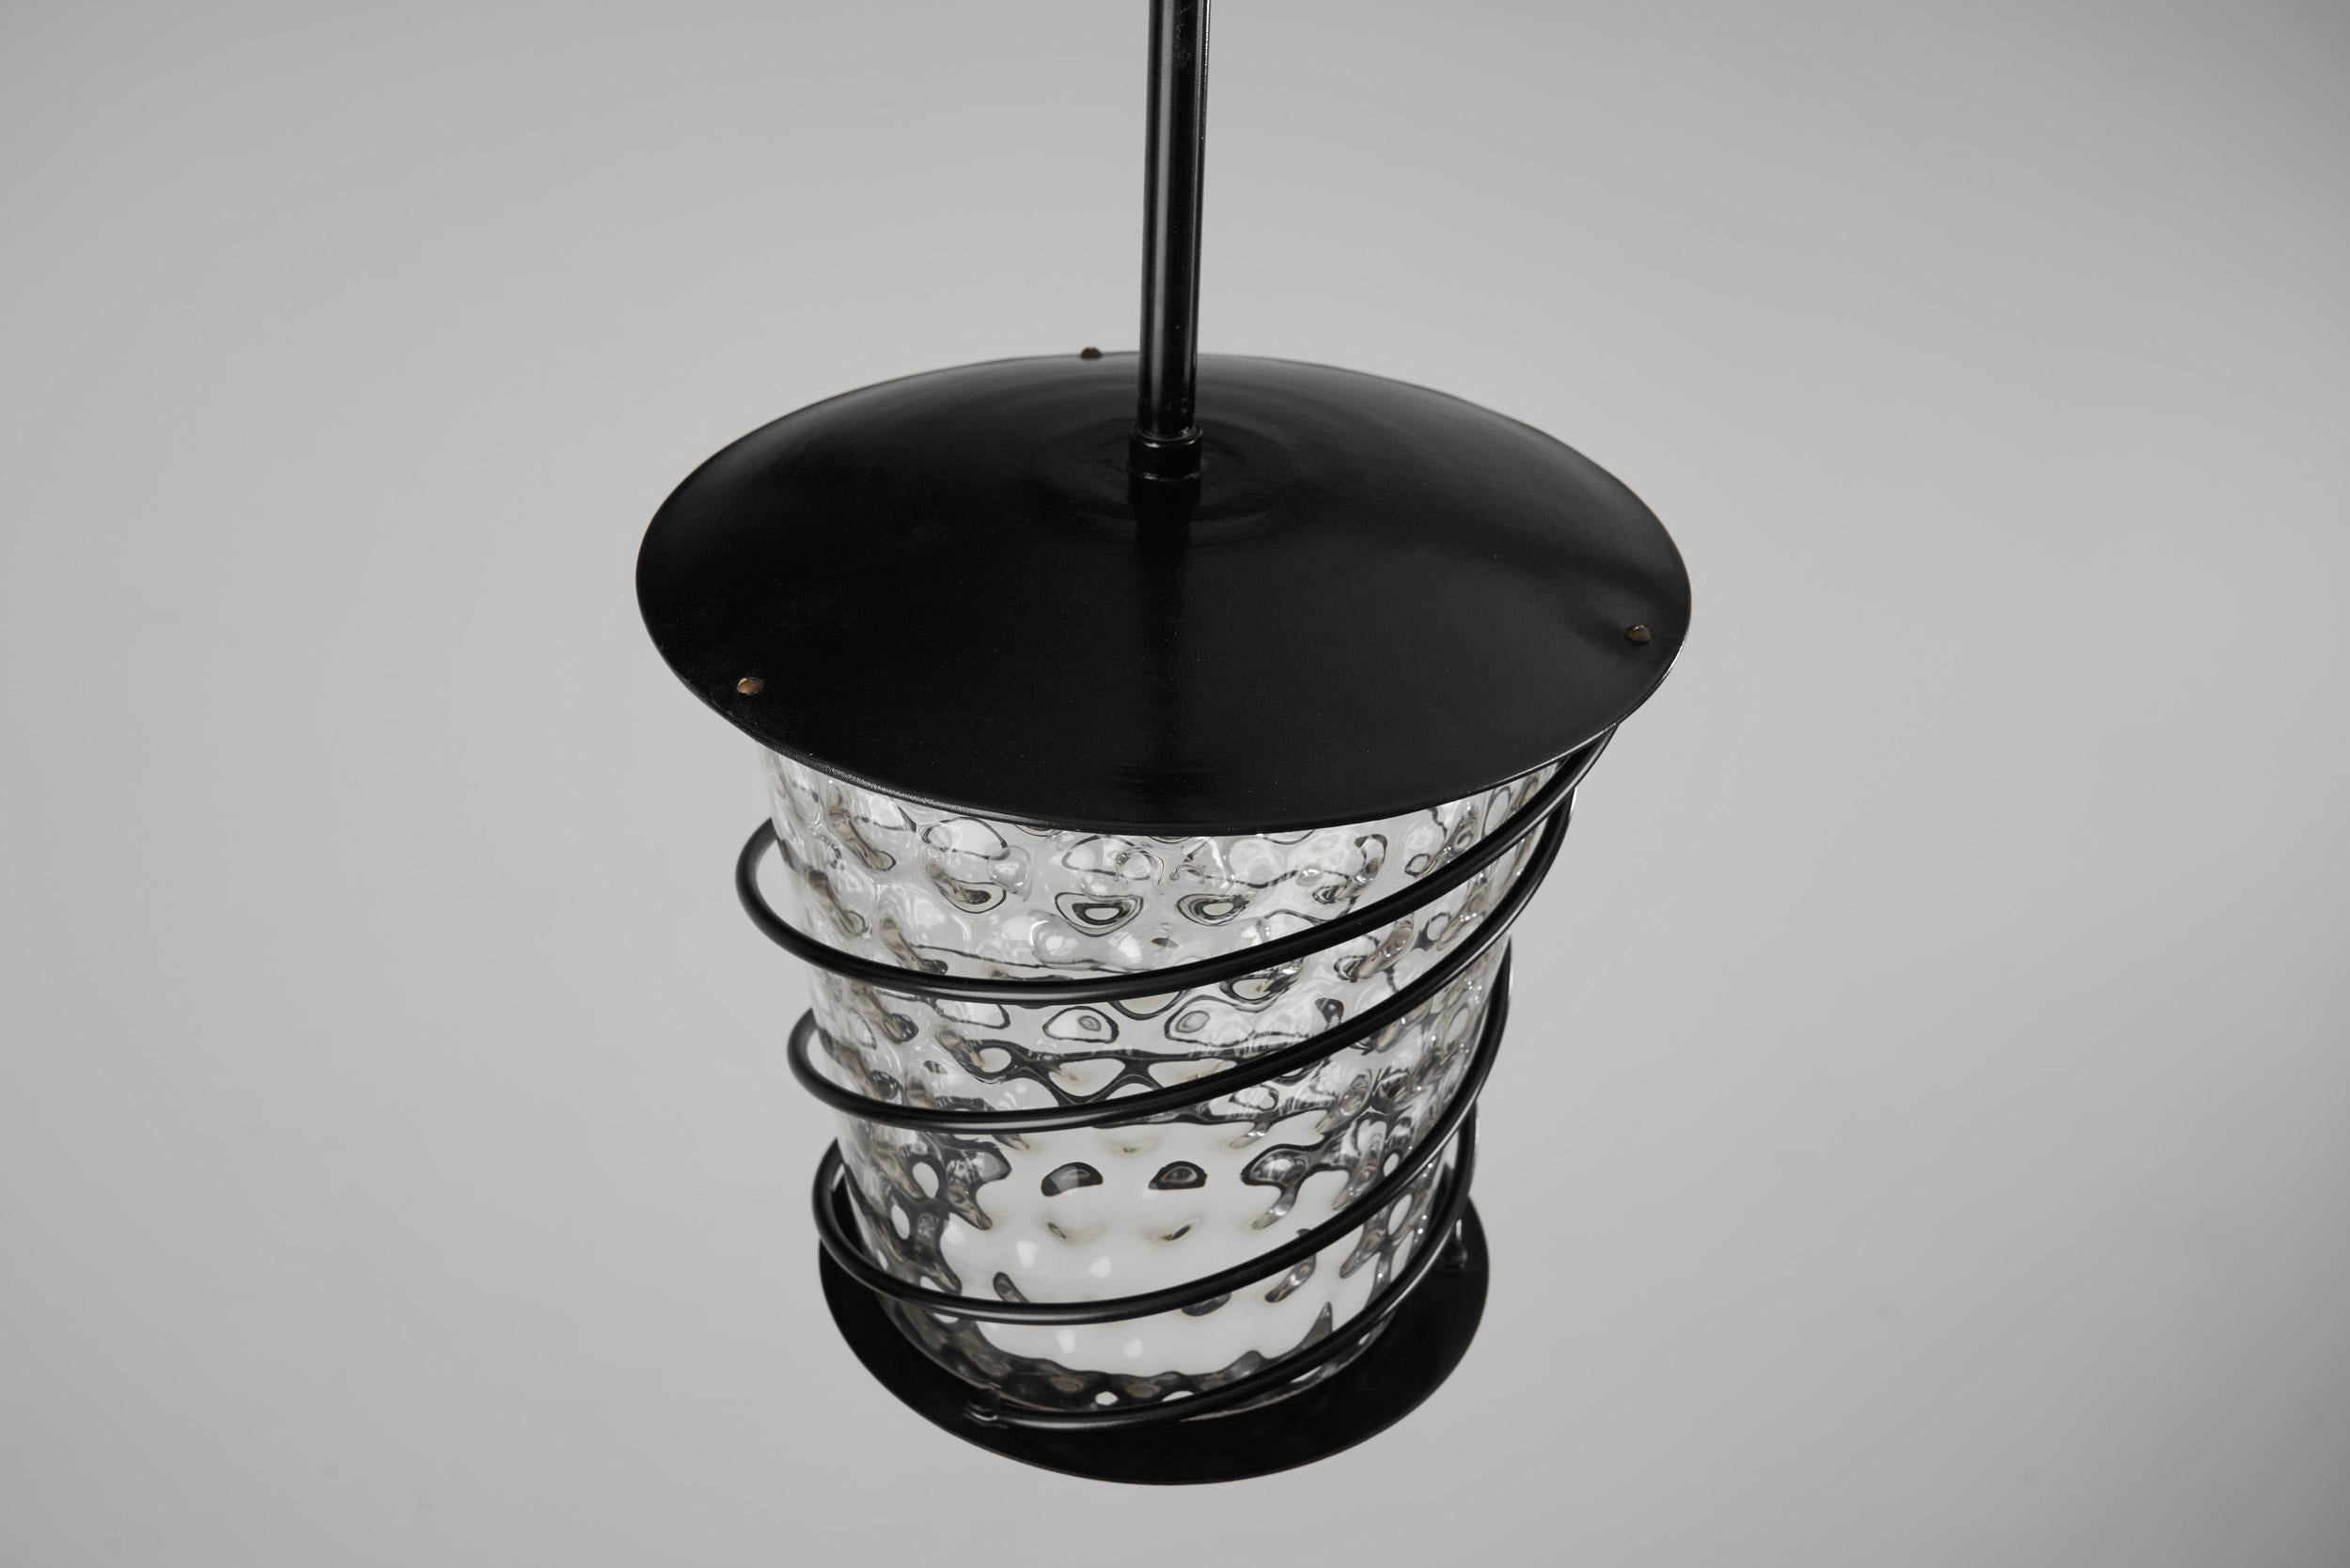 Scandinavian Tin and Glass Accent Ceiling Lamp, Scandinavia, 1920s For Sale 7